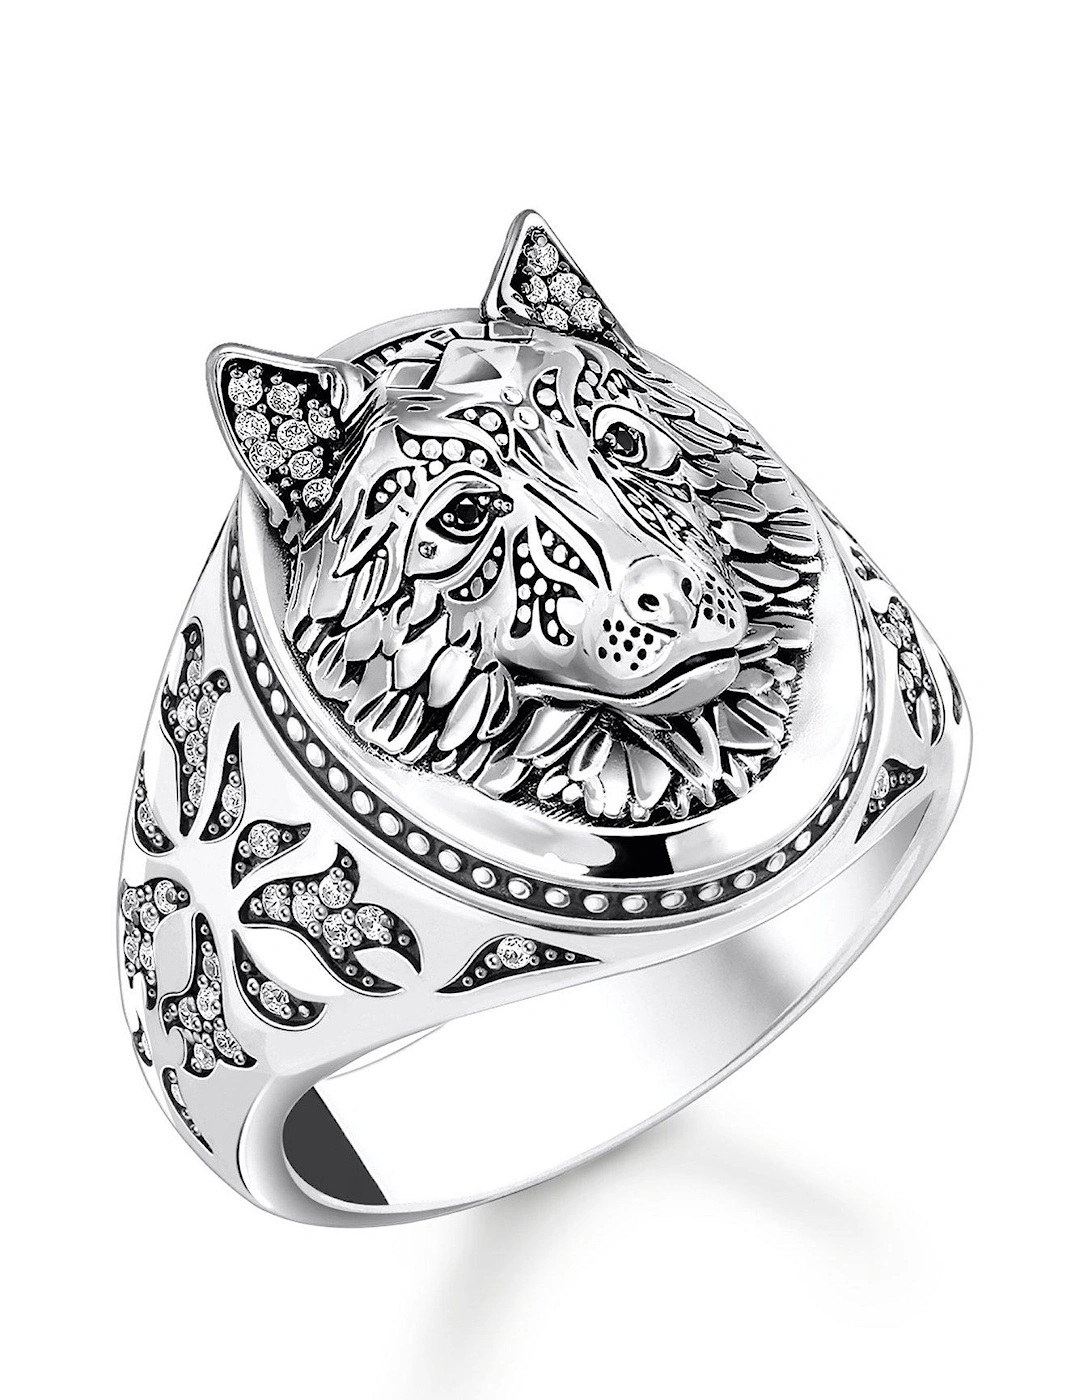 Rebel Wolf Signet Ring: Statement of strength and courage. Detailed 3D wolf face, hand-set stones in silver fur, lateral fur pattern, 2 of 1